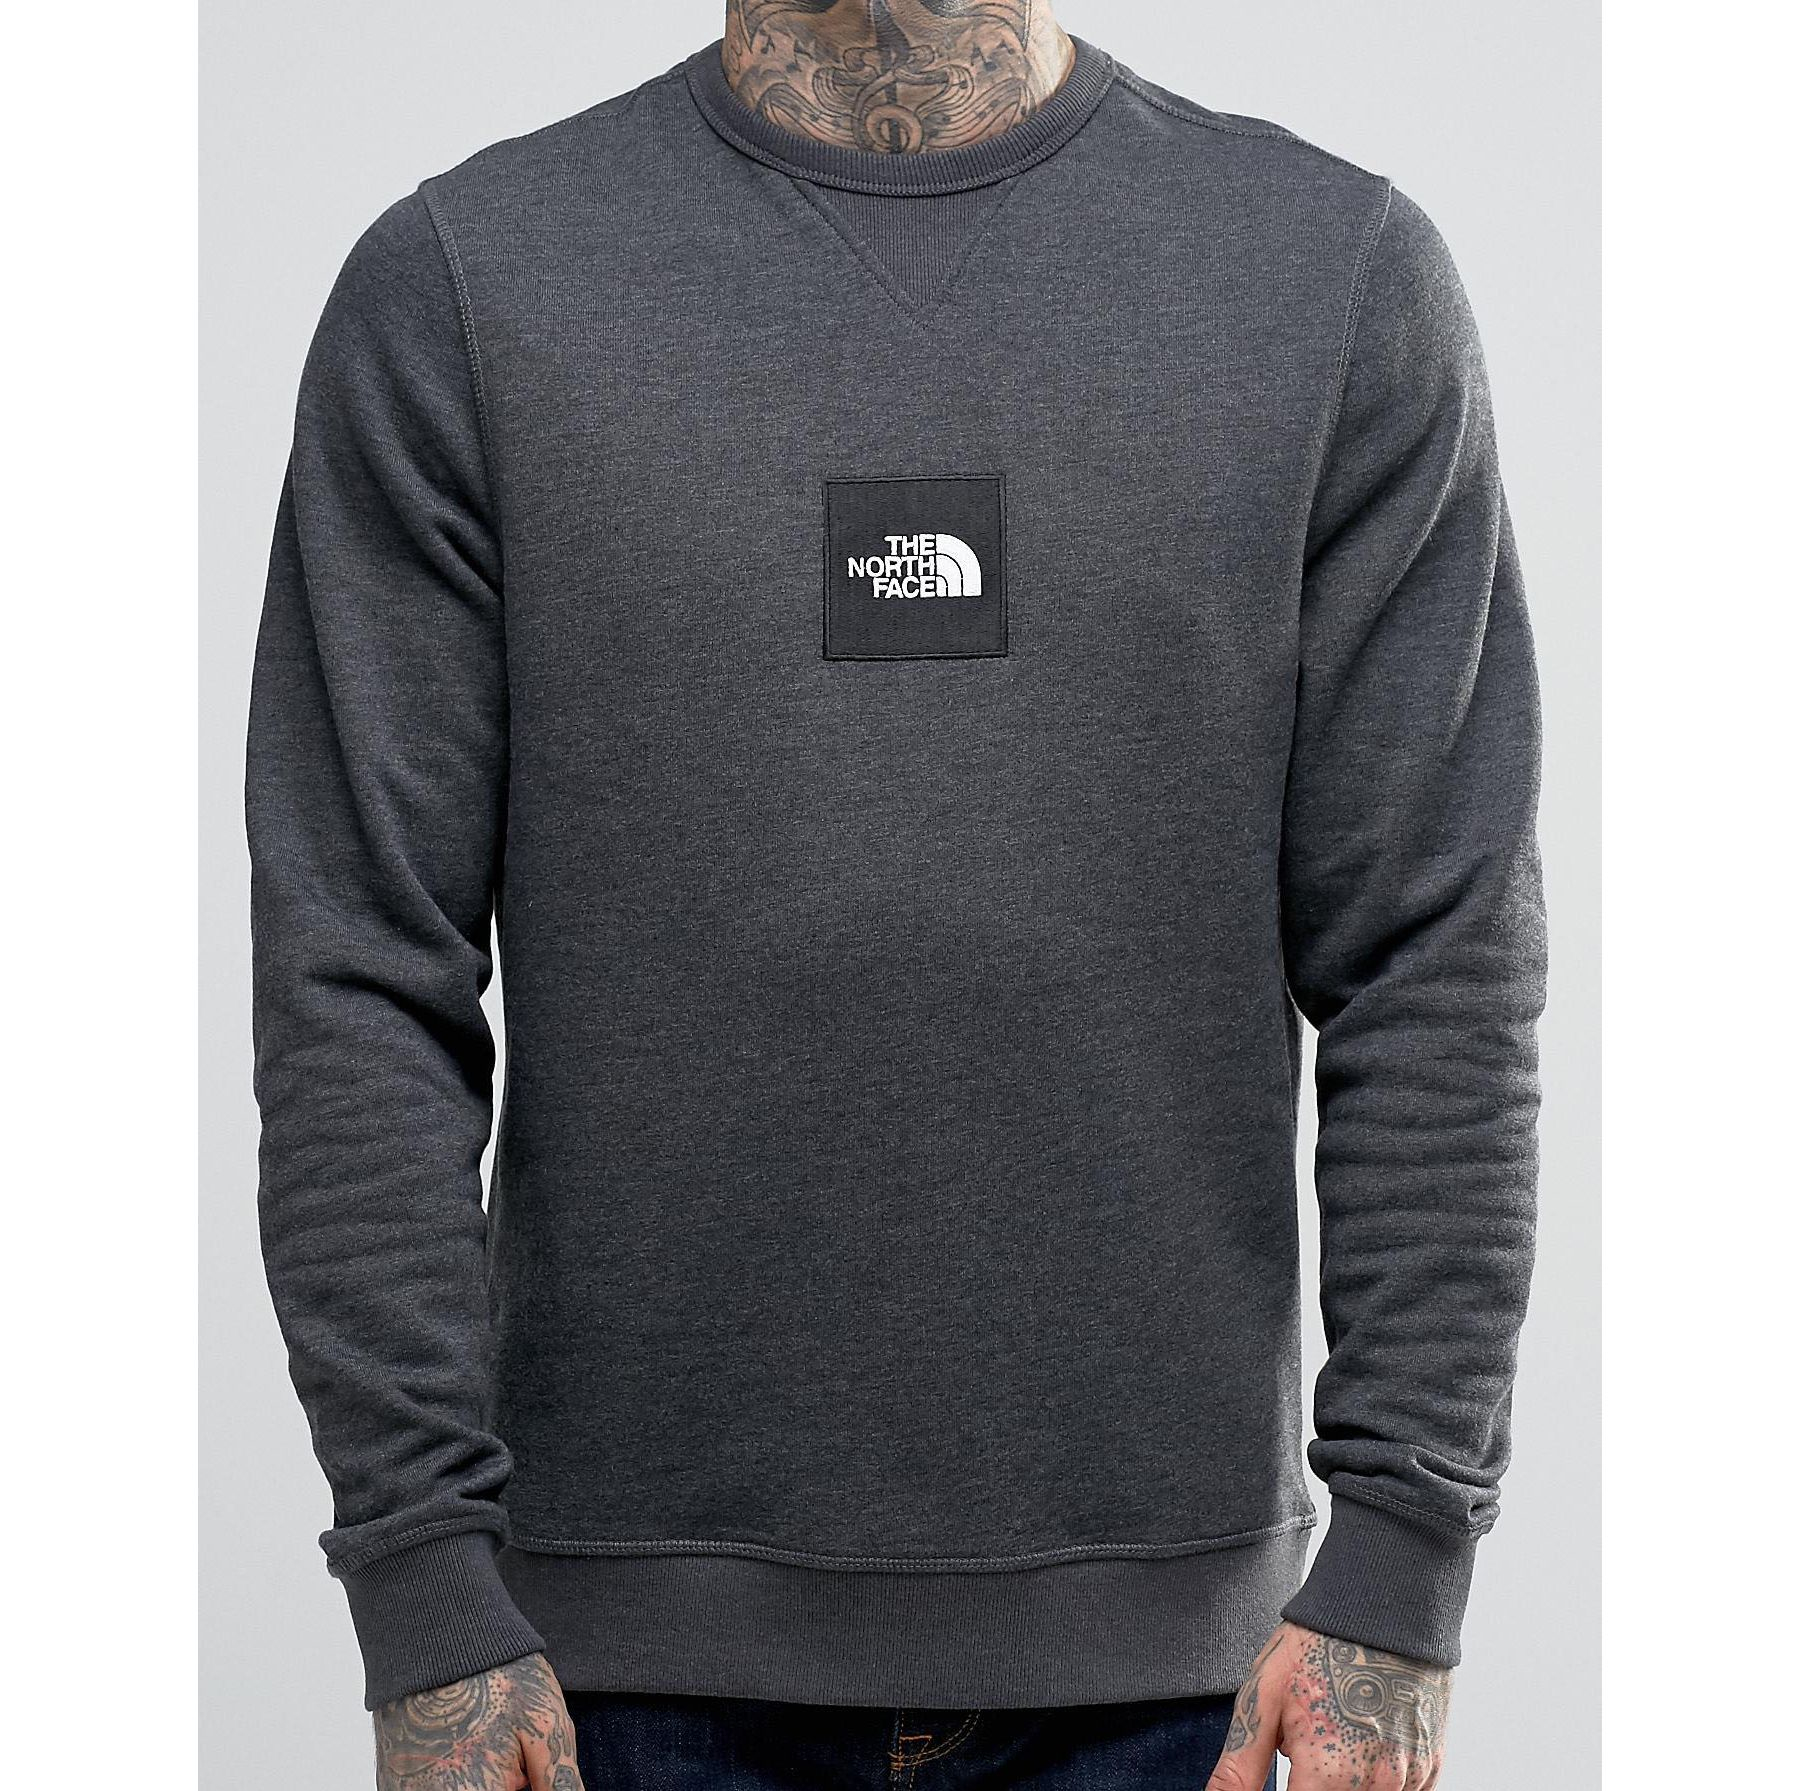 Lyst - The North Face Sweatshirt With Embroidered Patch Logo In Grey in ...